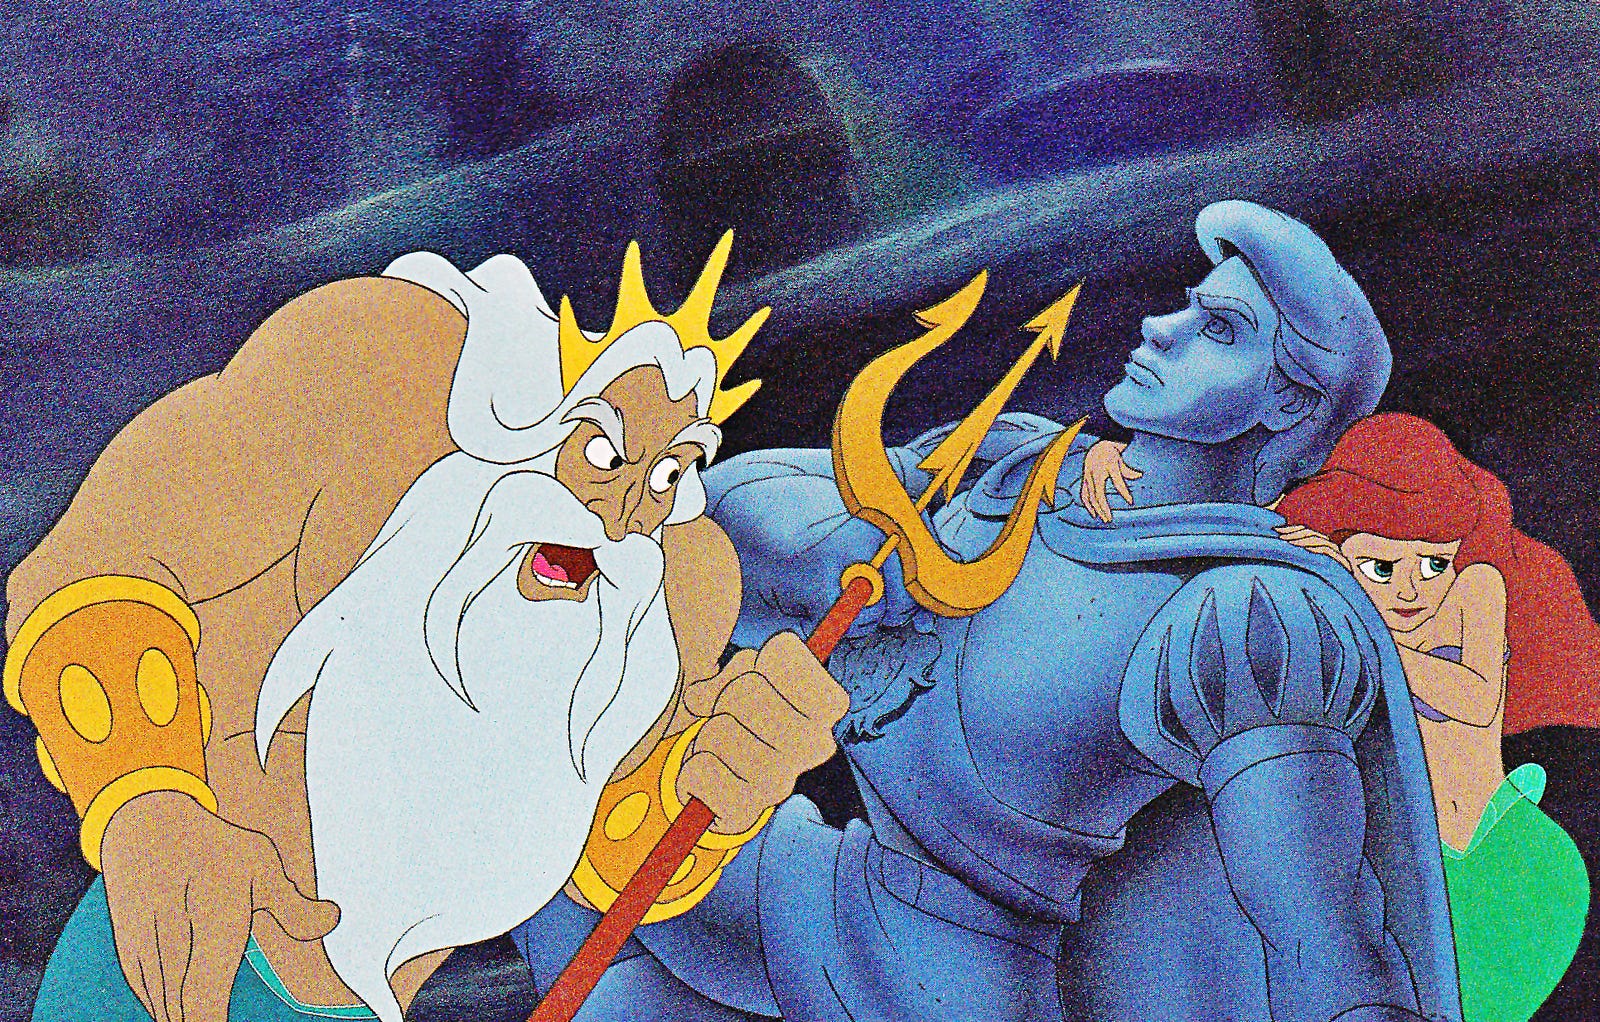 King Triton confronts his daughter, Ariel, in Disney’s “The Little Mermaid” (1989).